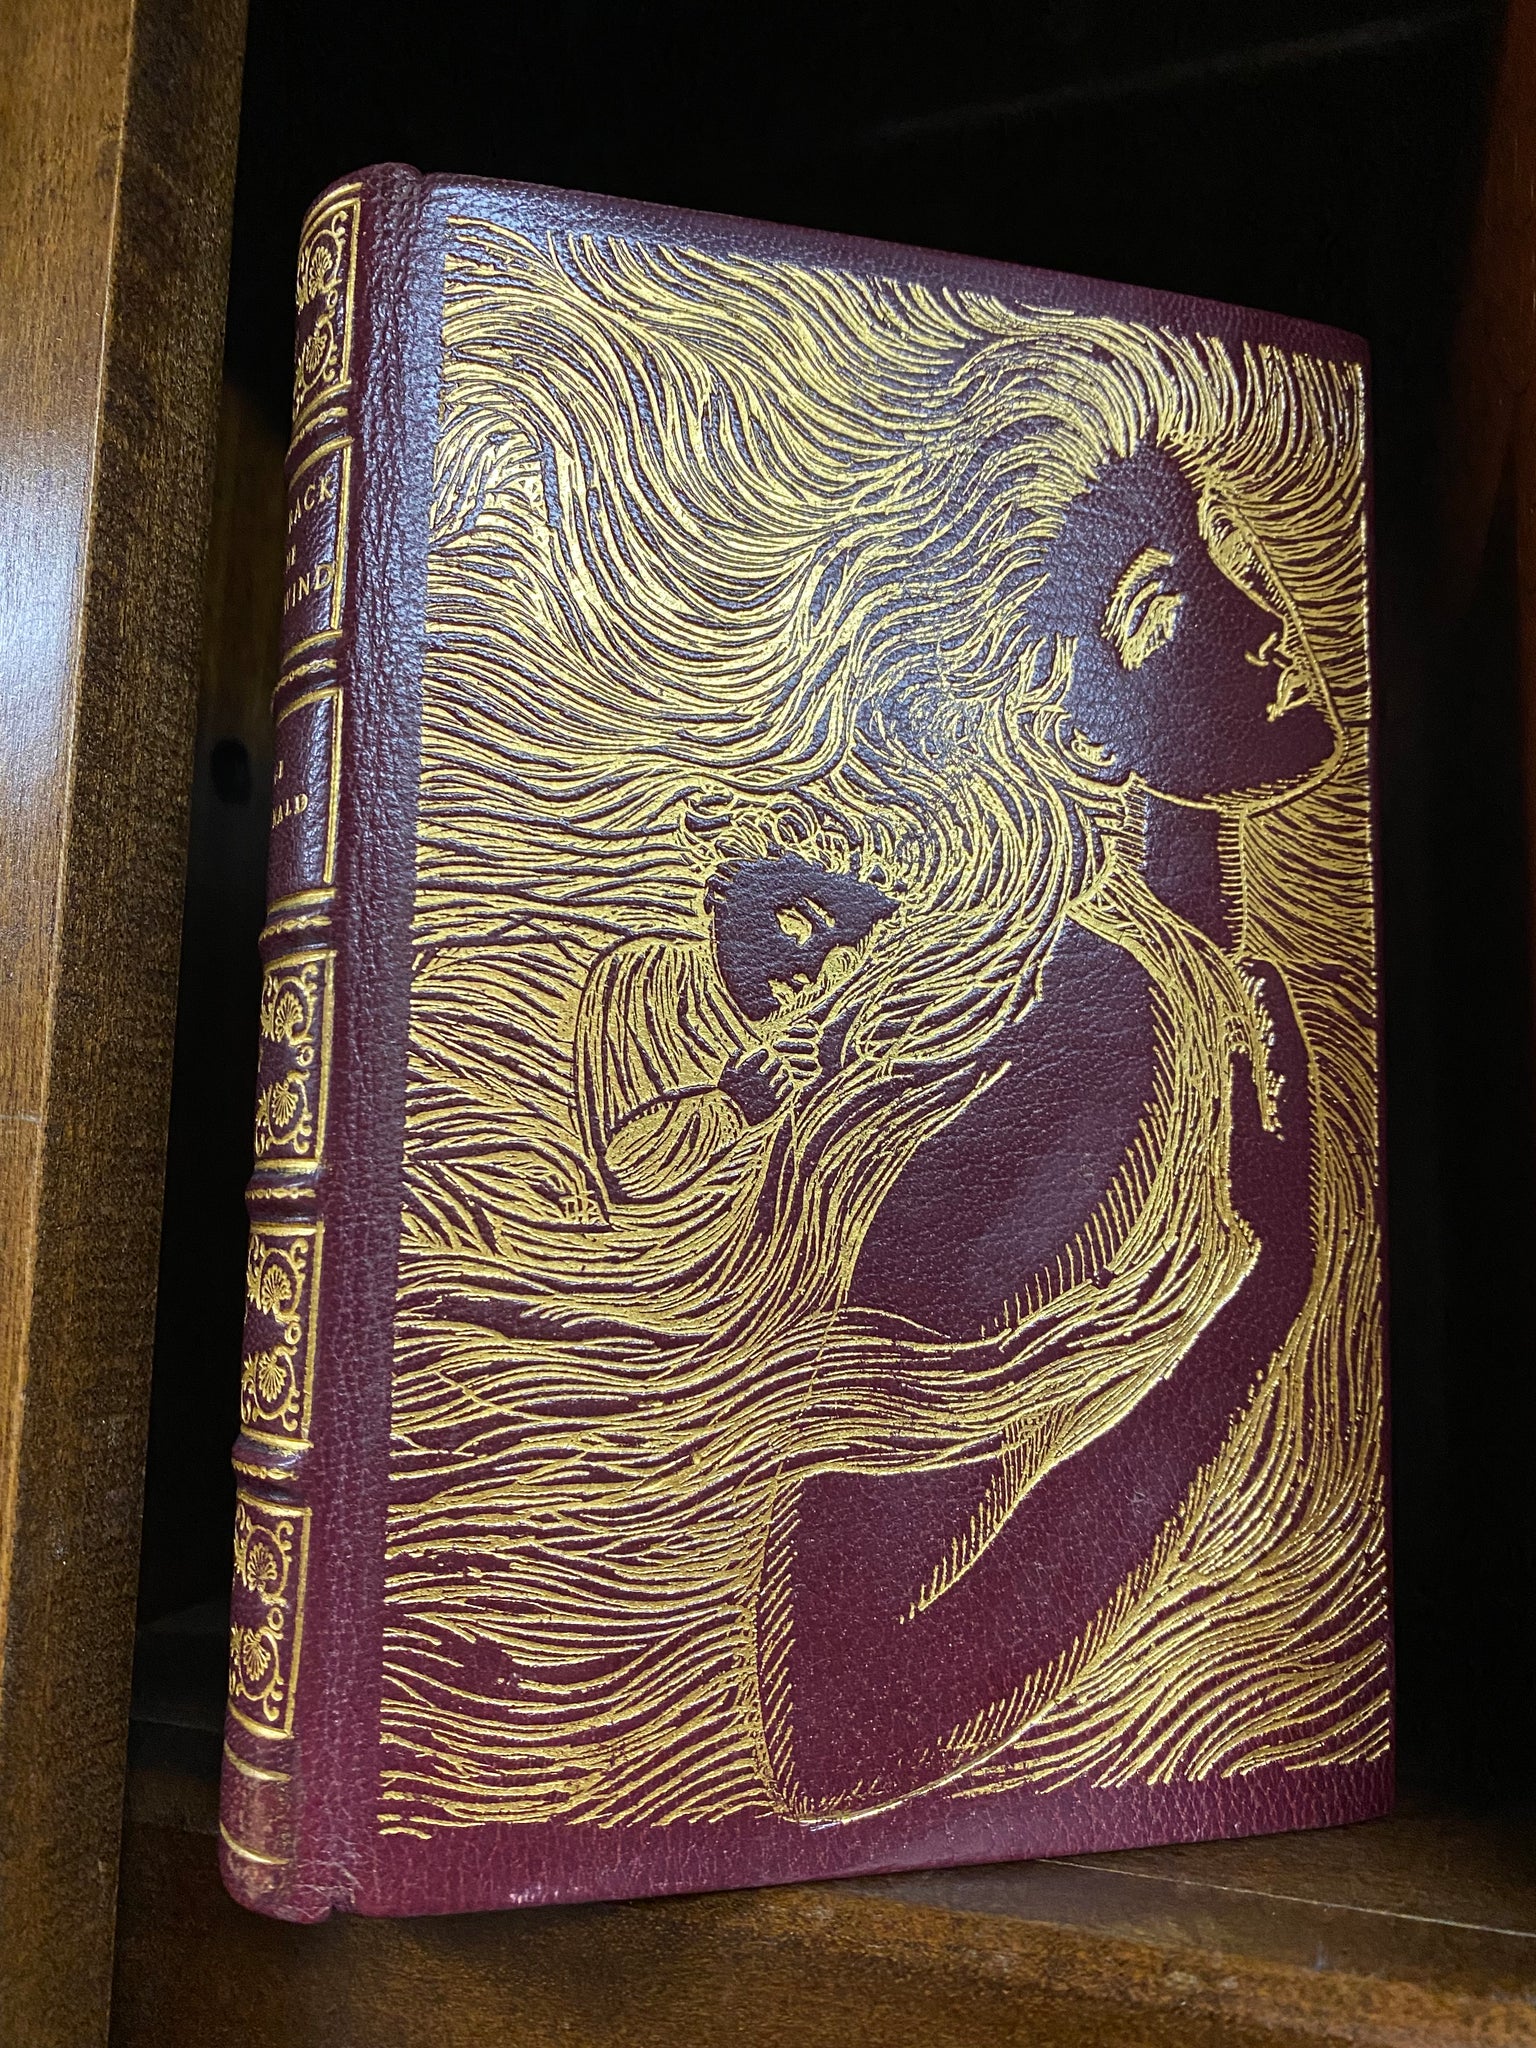 At the Back of the North Wind (First Edition - 1871)